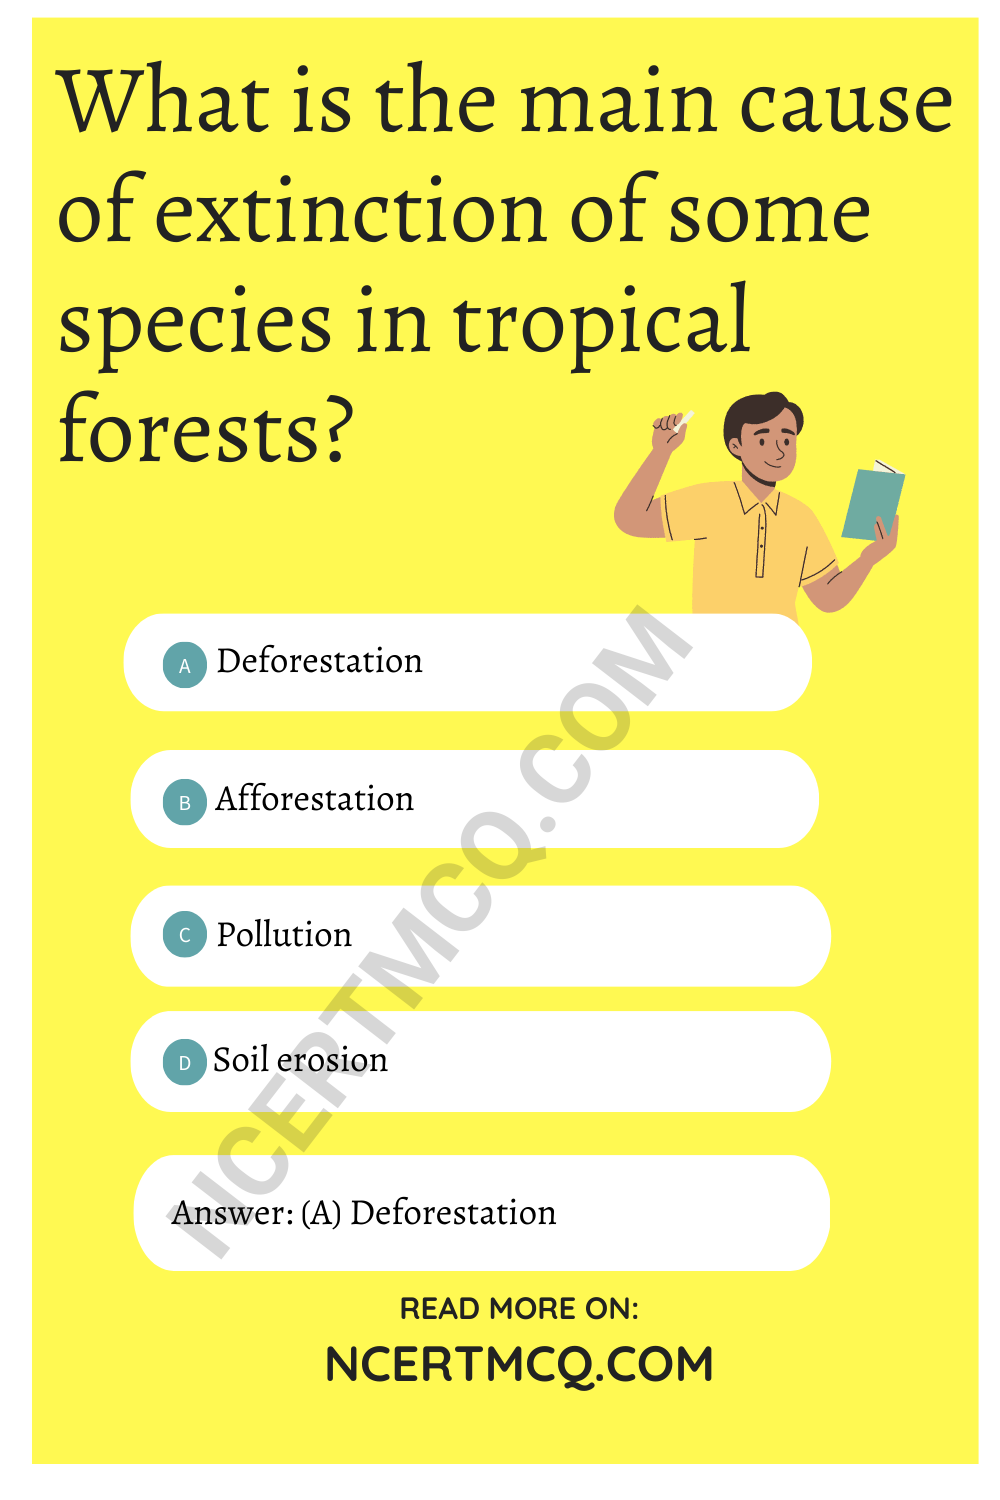 What is the main cause of extinction of some species in tropical forests?